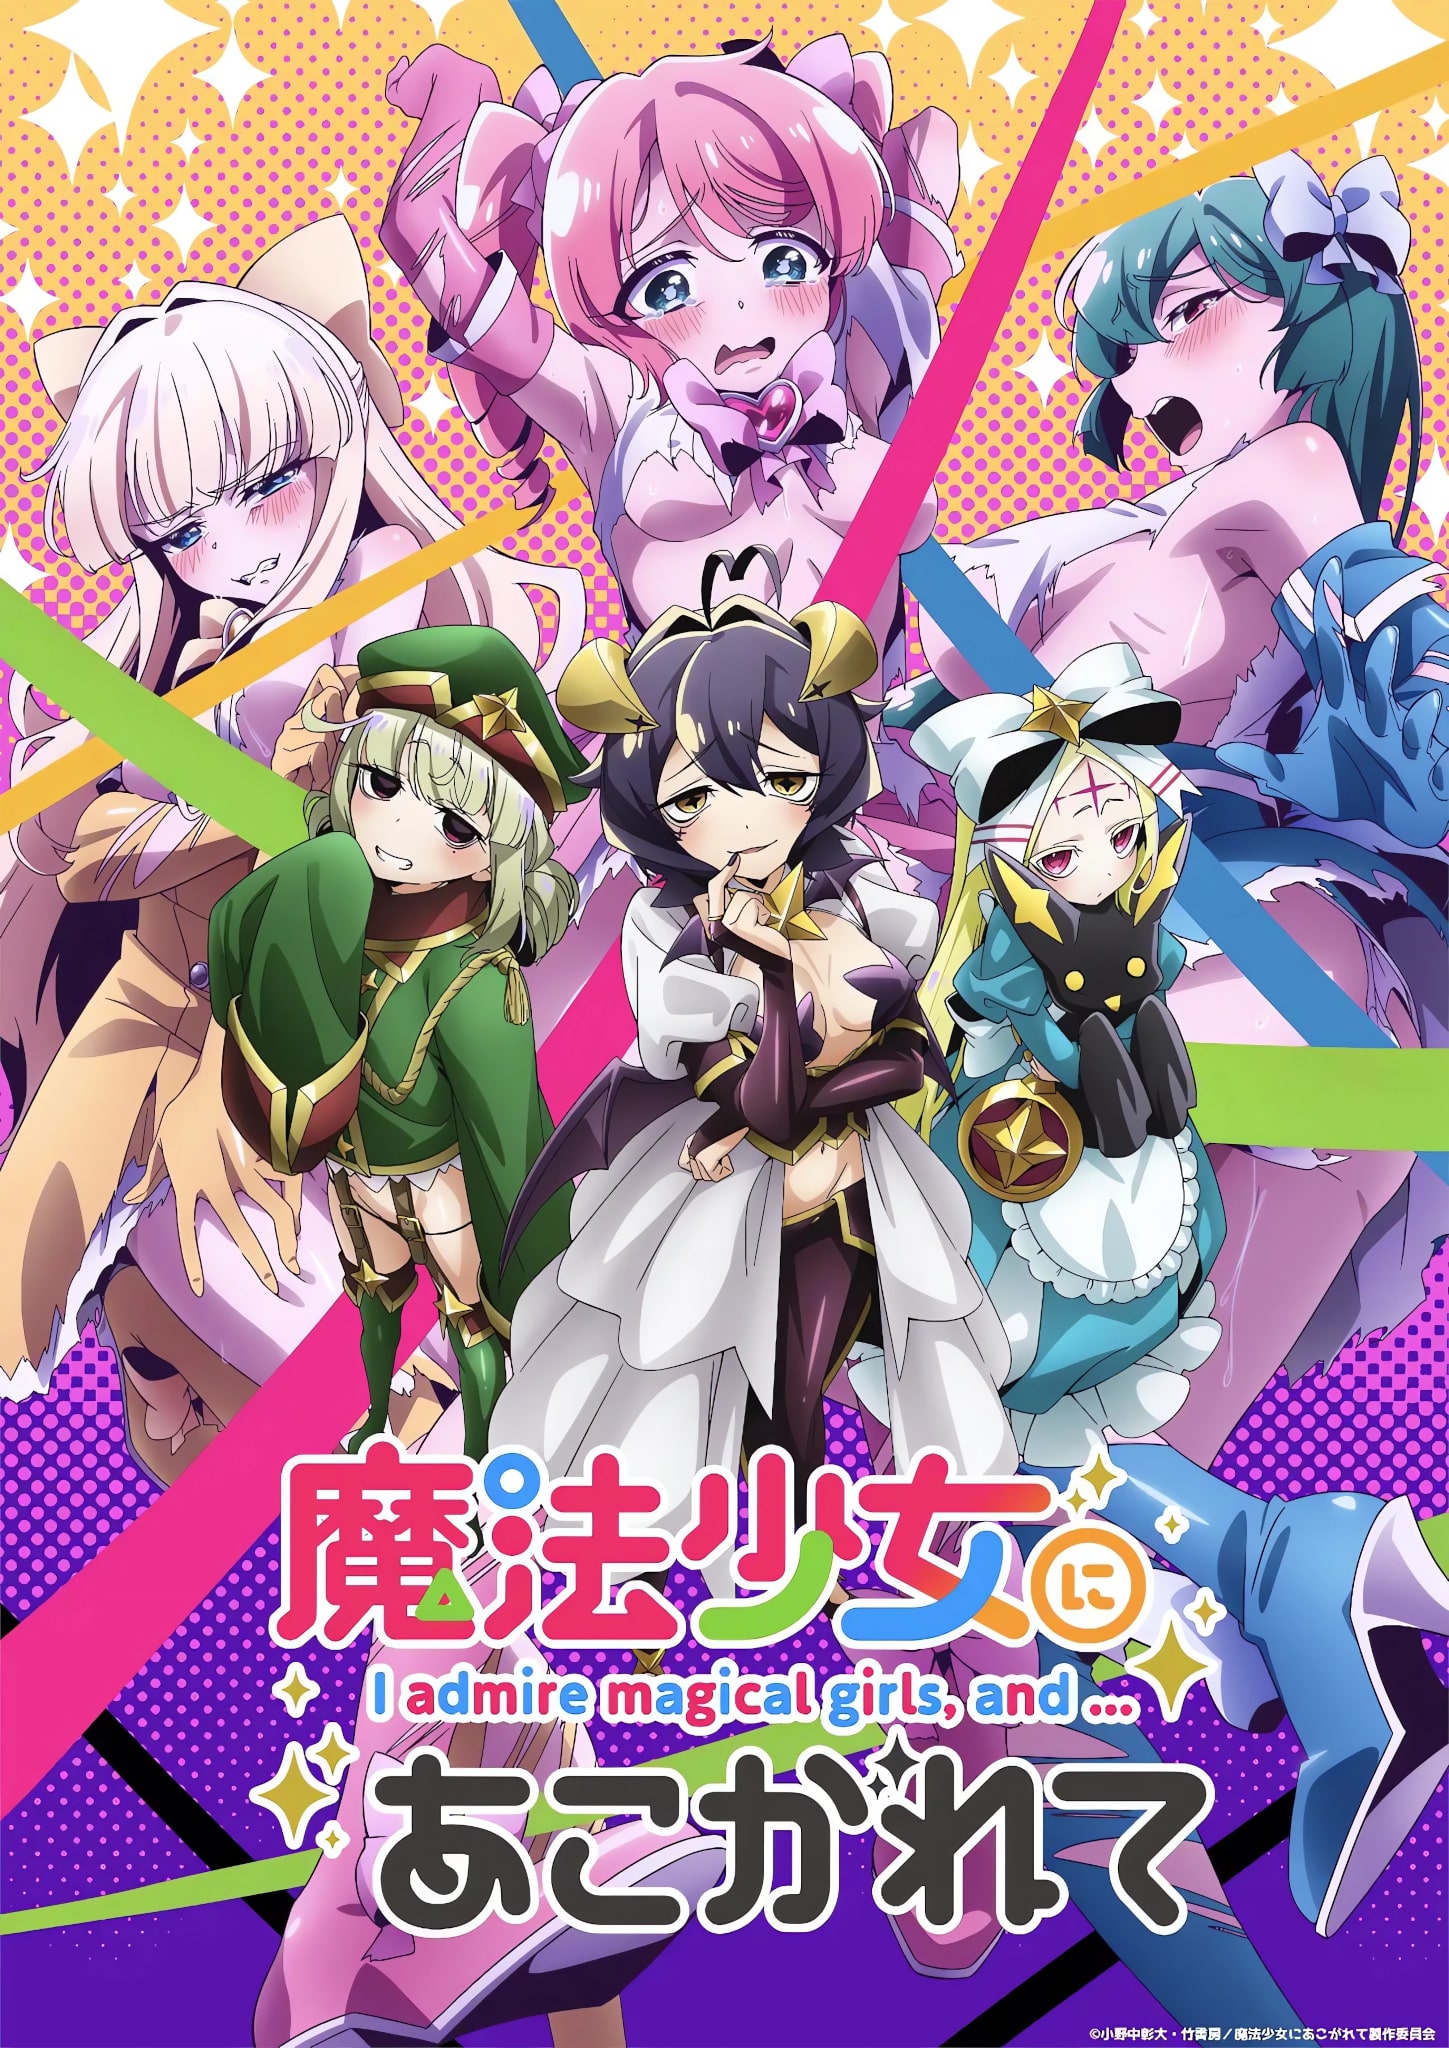 Second visuel pour lanime Looking up to Magical Girls